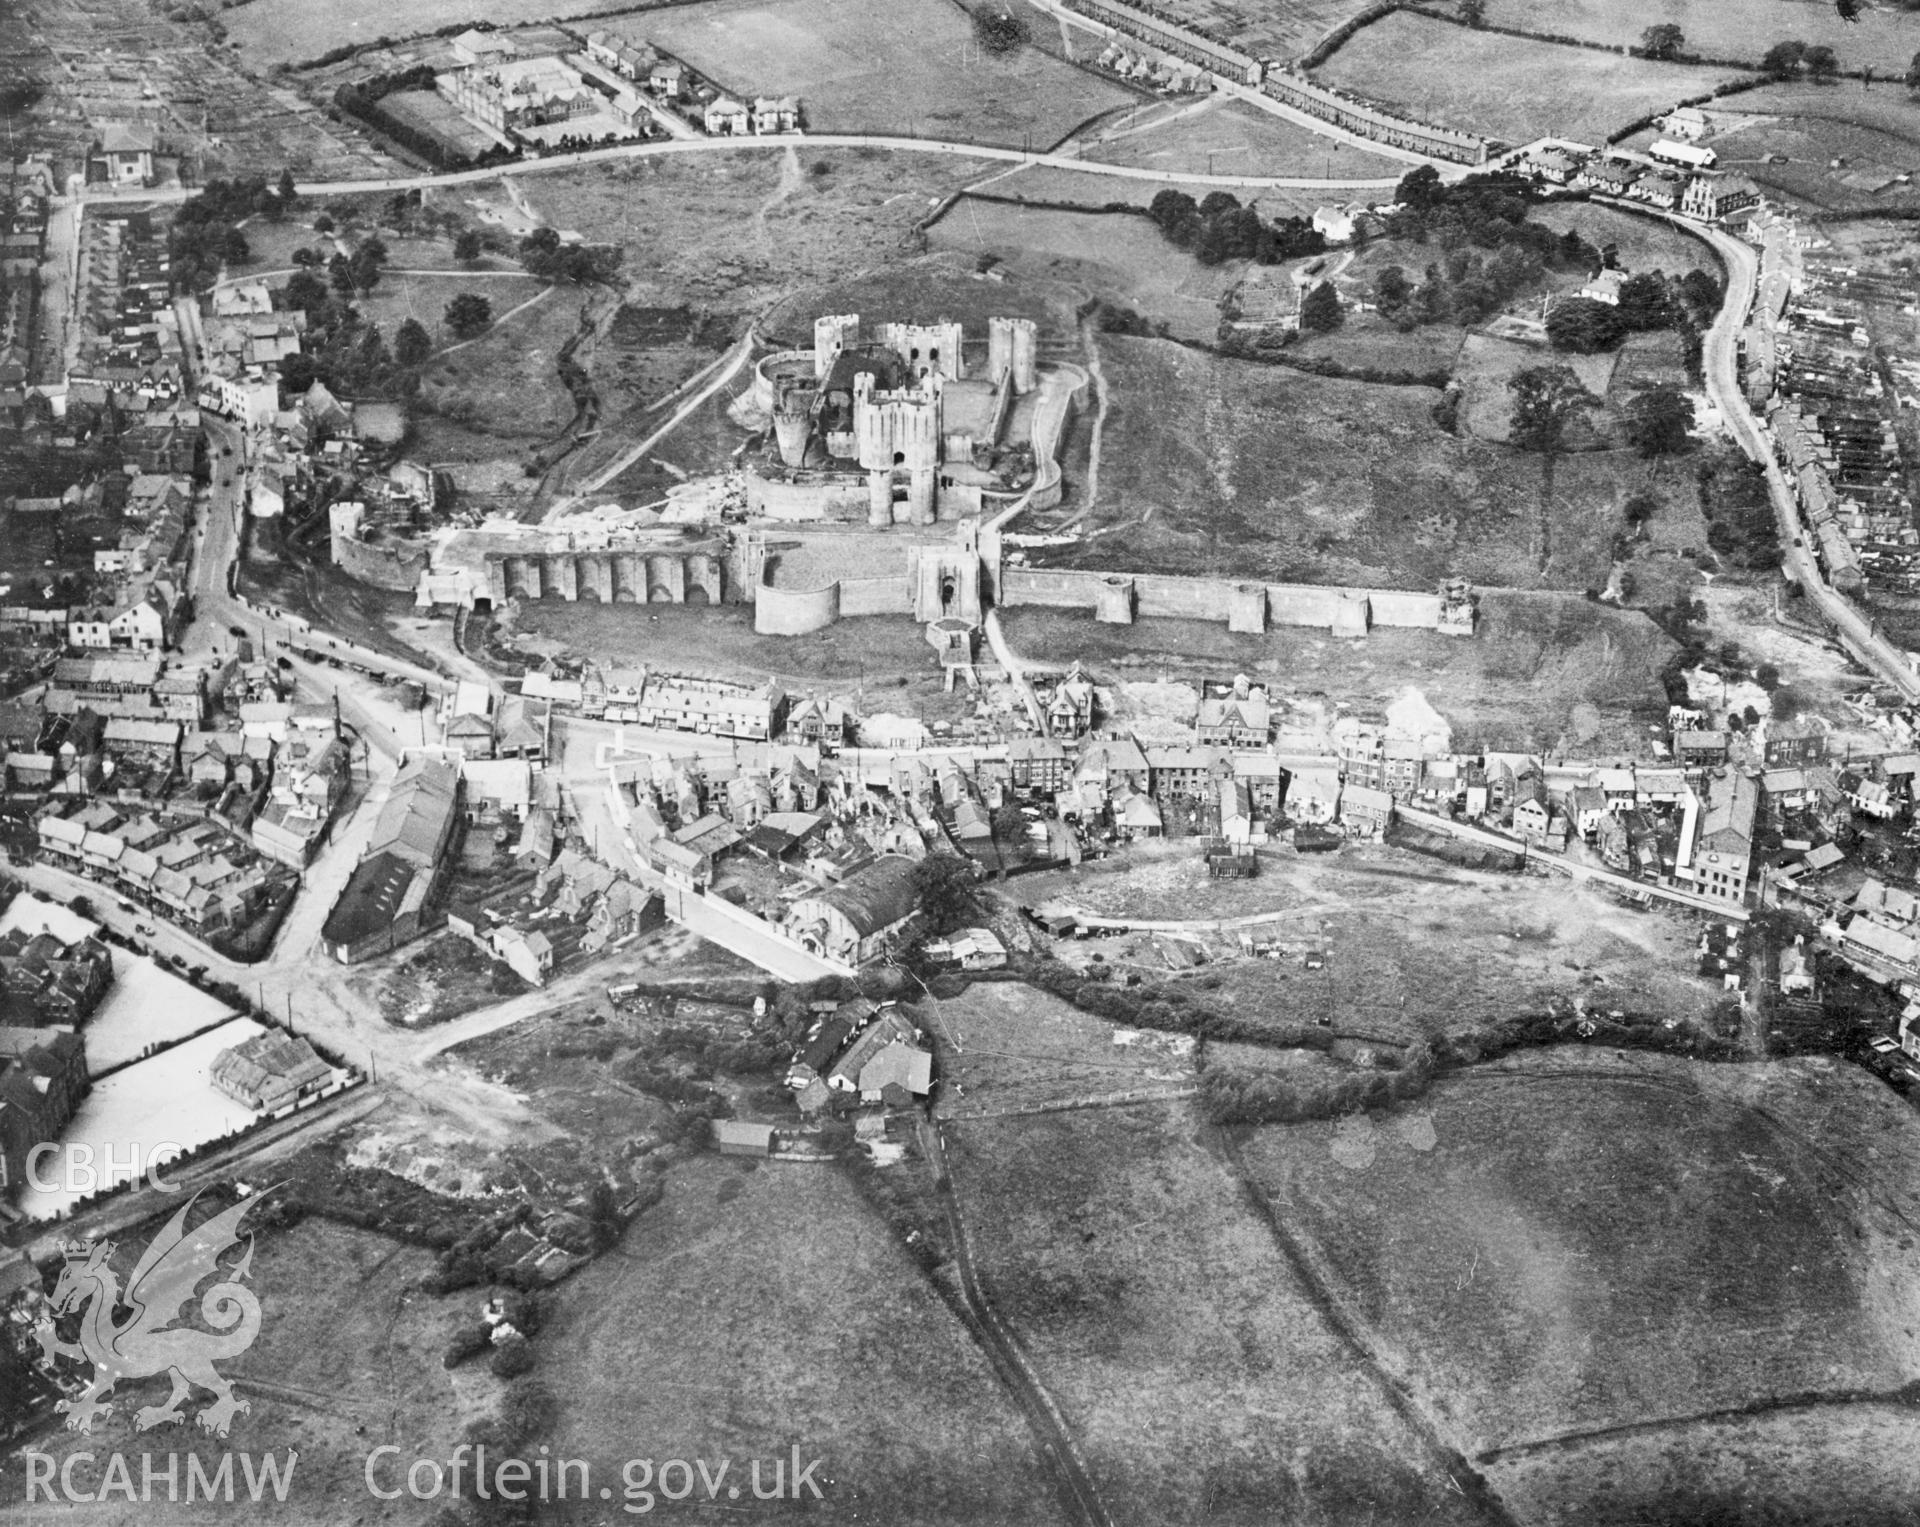 View of Caerphilly showing castle. Oblique aerial photograph, 5?x4? BW glass plate.